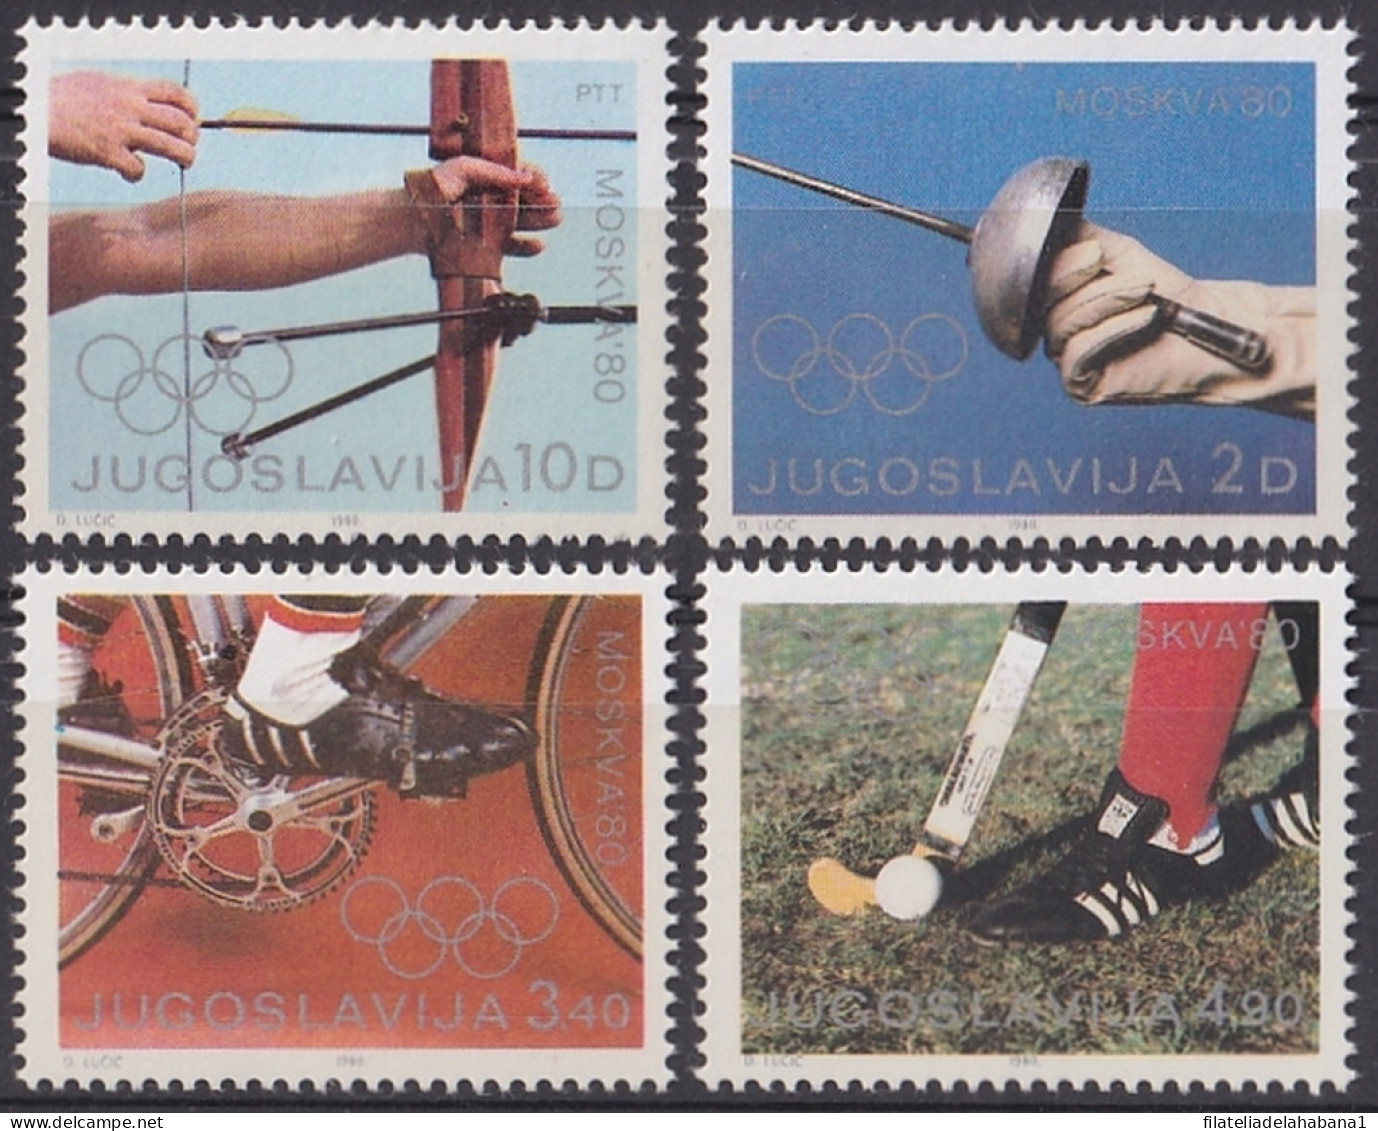 F-EX47618 YUGOSLAVIA MNH 1980 MOSCOW OLYMPIC GAMES ARCHERY FENCING CYCLE BICYCLE HOCKEY.  - Verano 1980: Moscu